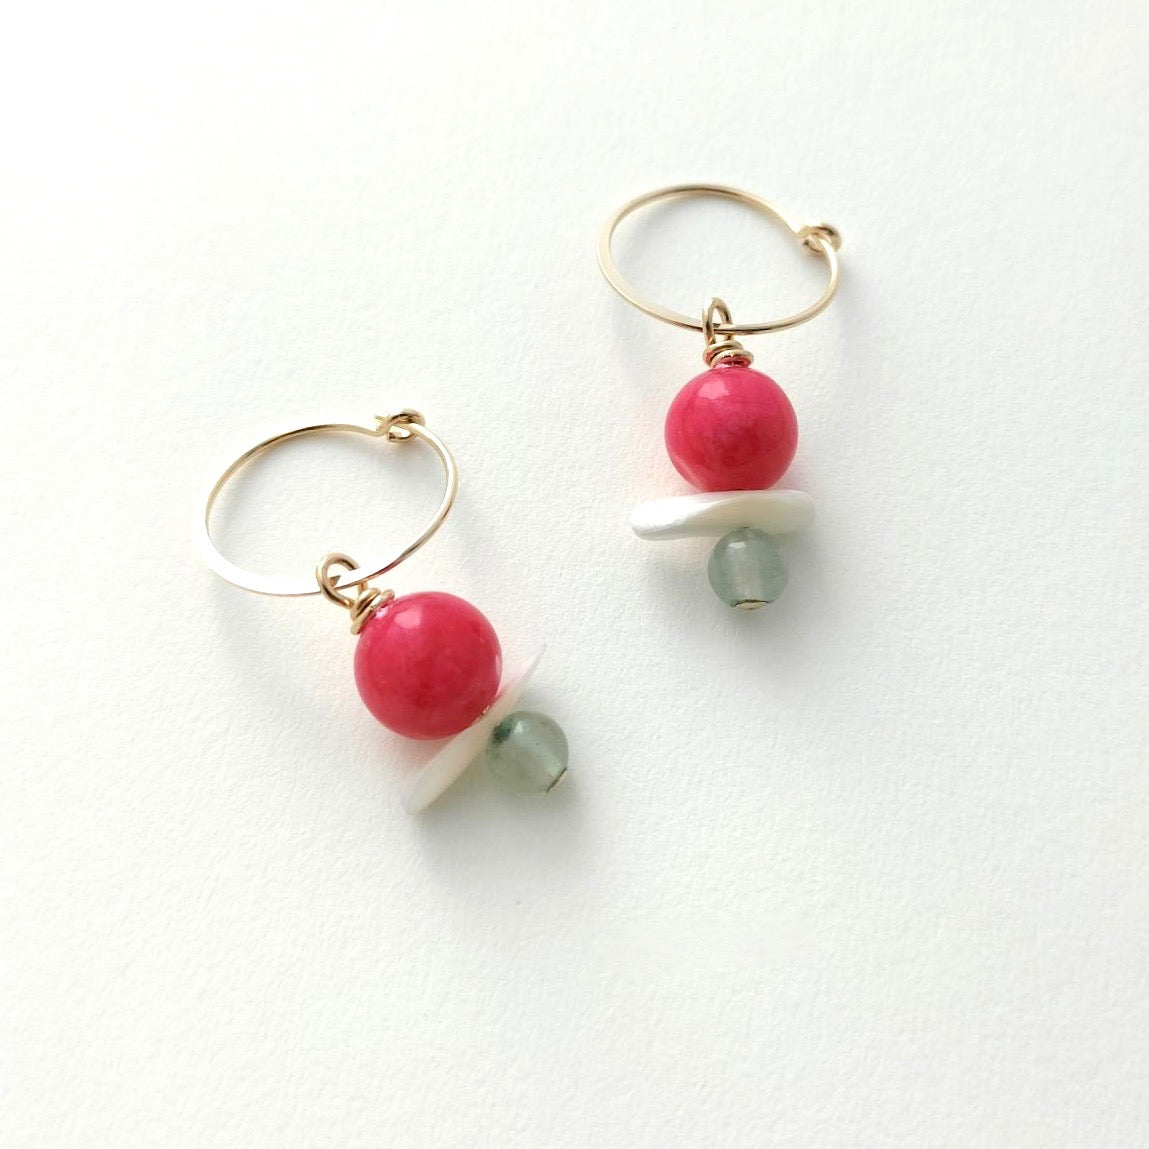 Pink and green bead earrings